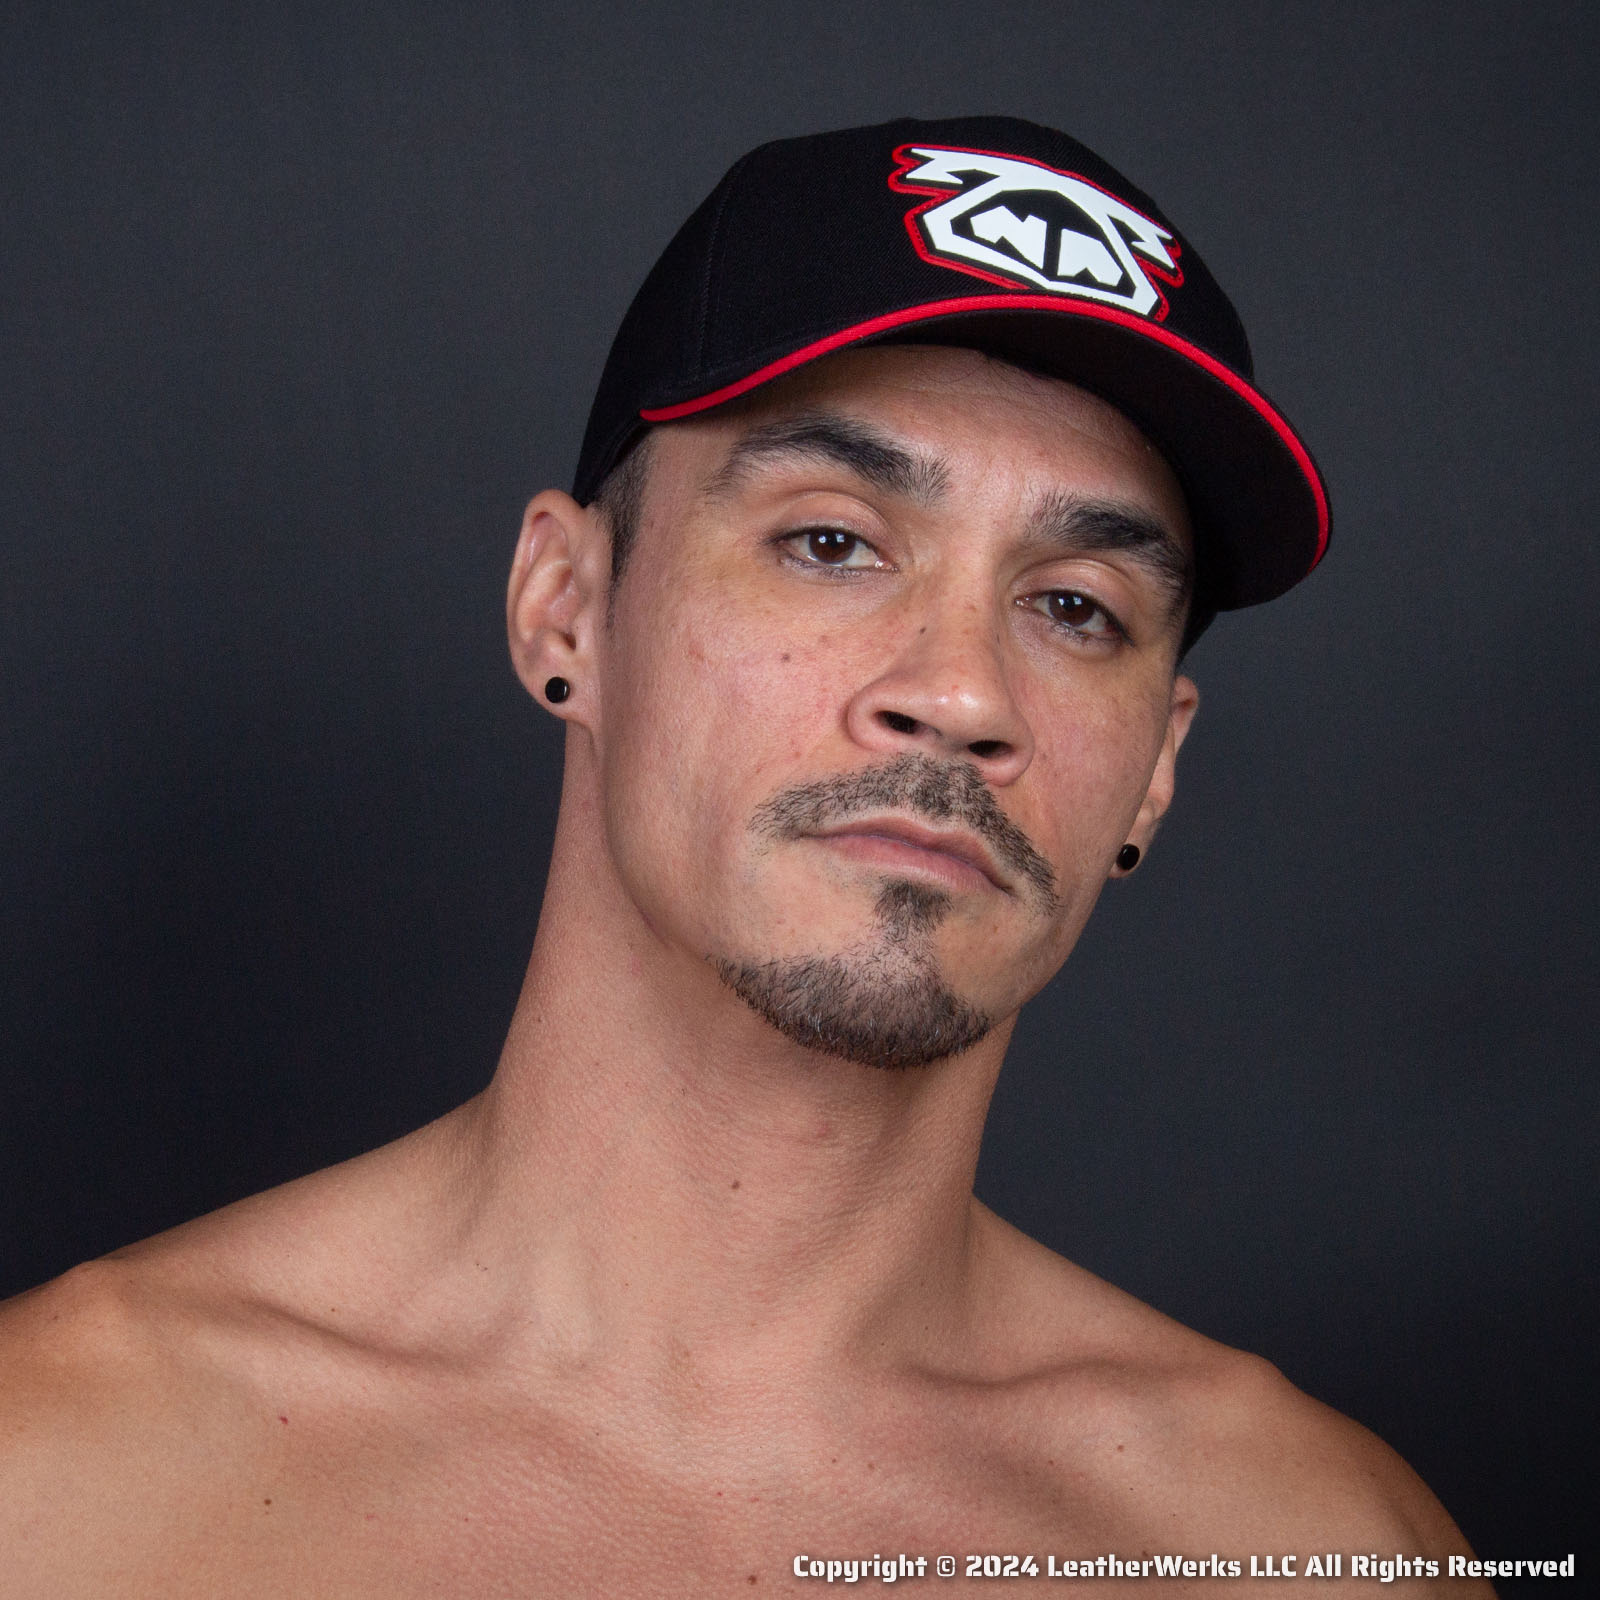 Nasty Pig Snout Cap 3.0 Red White and Black Main